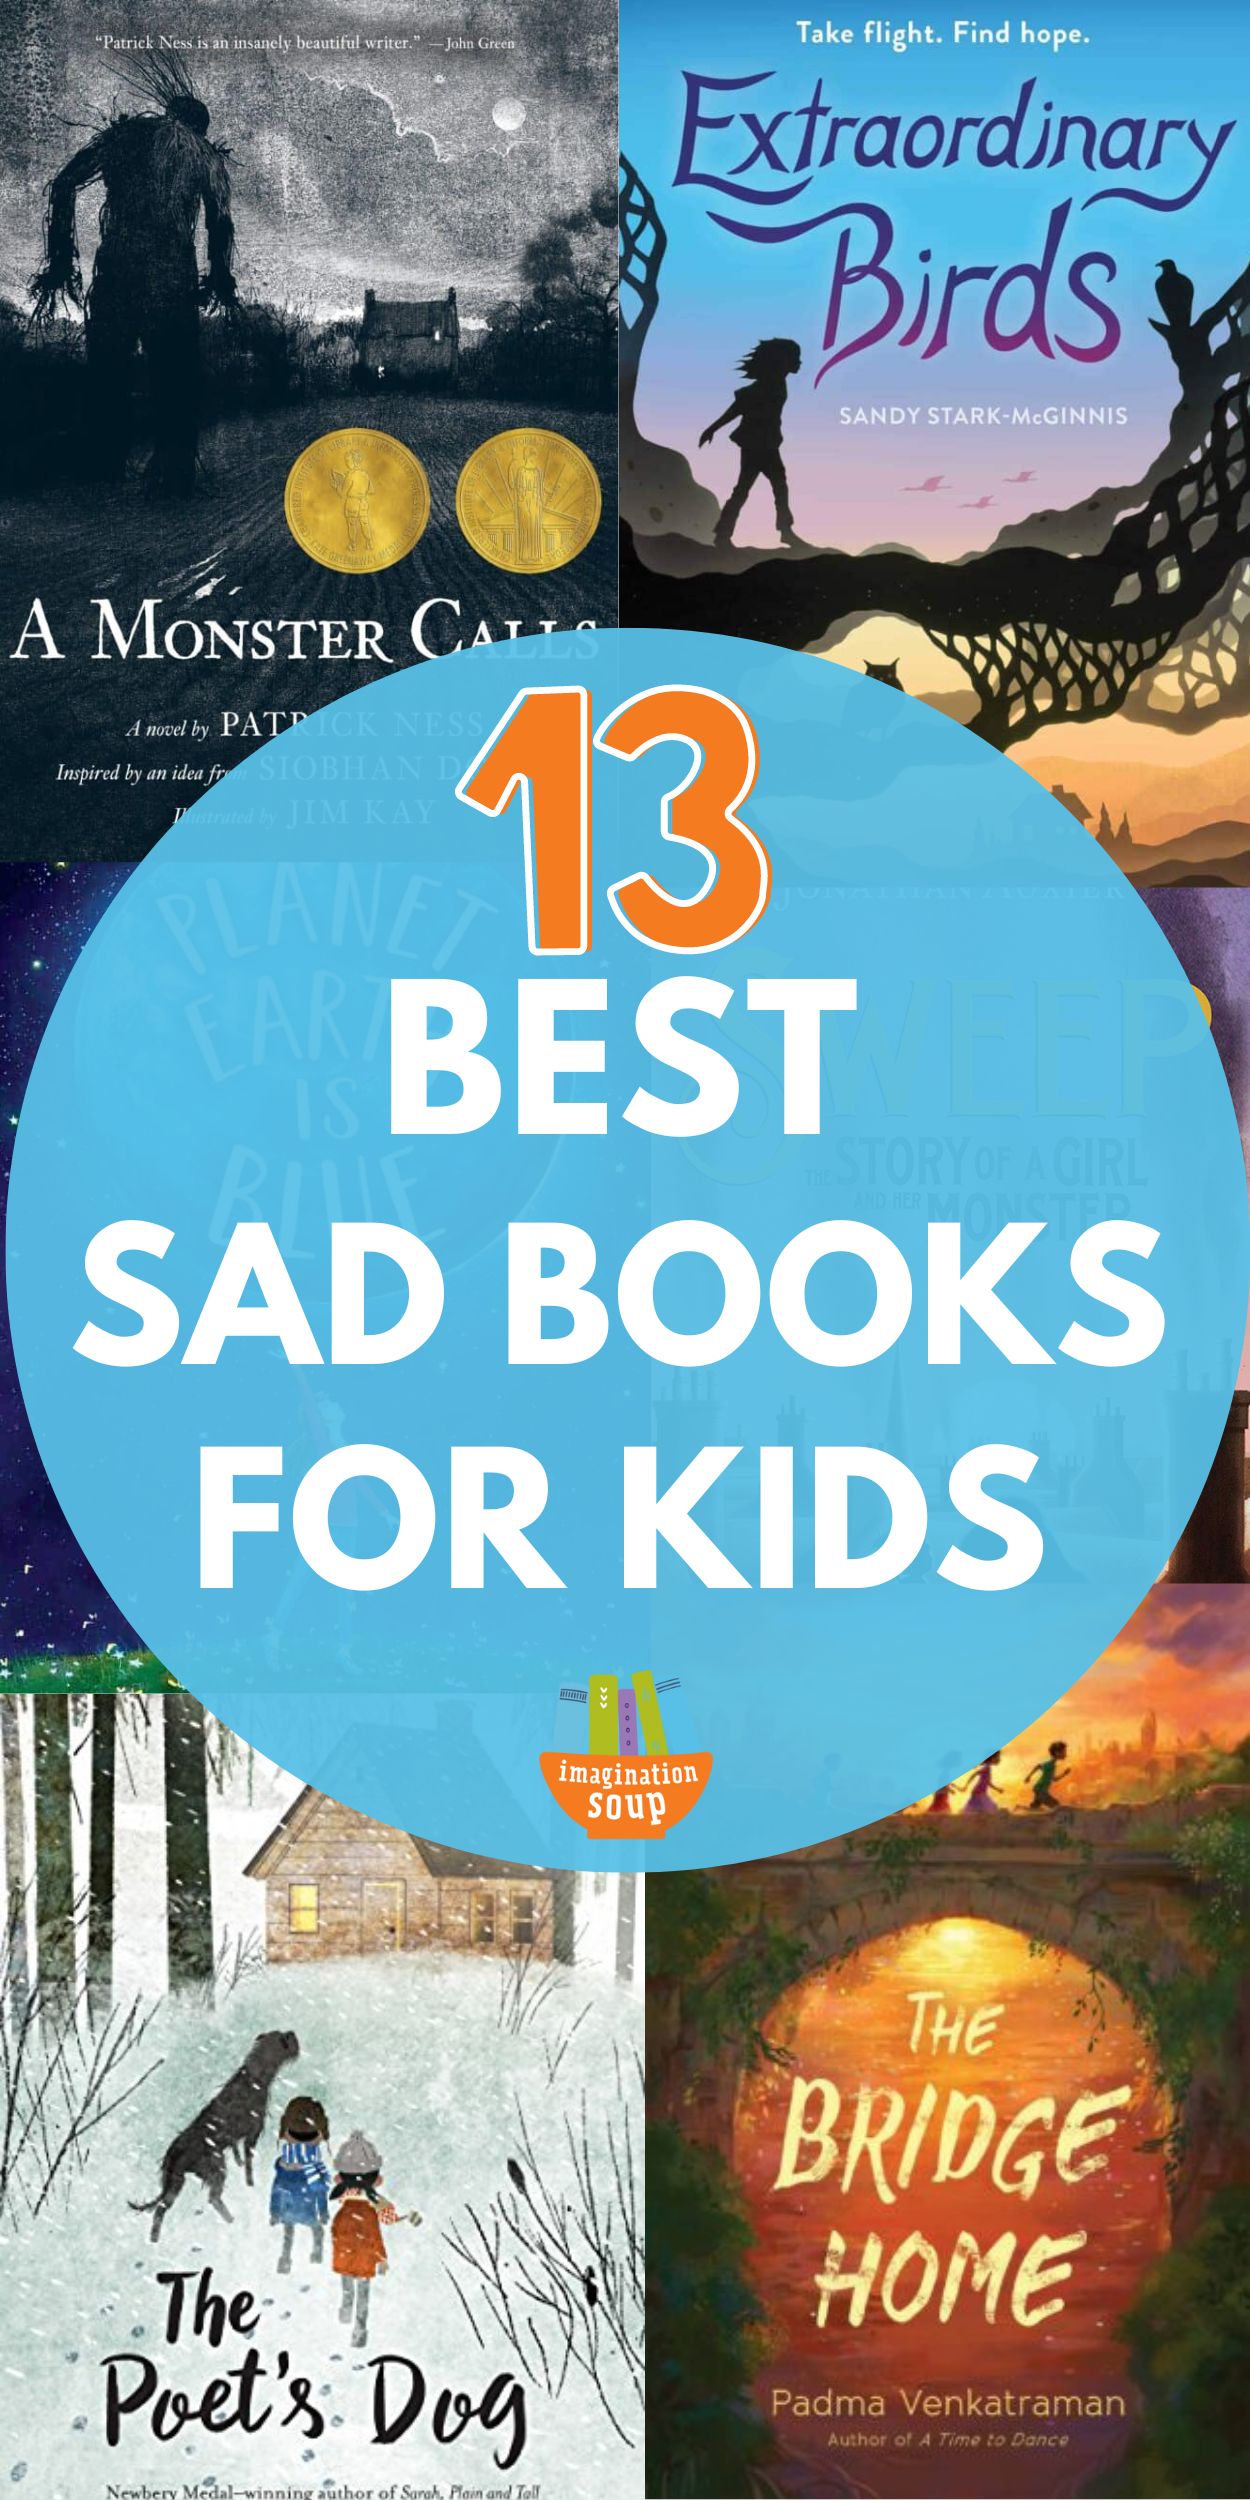 Sometimes we need to read sad books to release the tears that were ready and waiting. And other times, we're surprised by a heart-wrenching story. Either way, here are beautifully written middle grade books for kids that will make you cry.